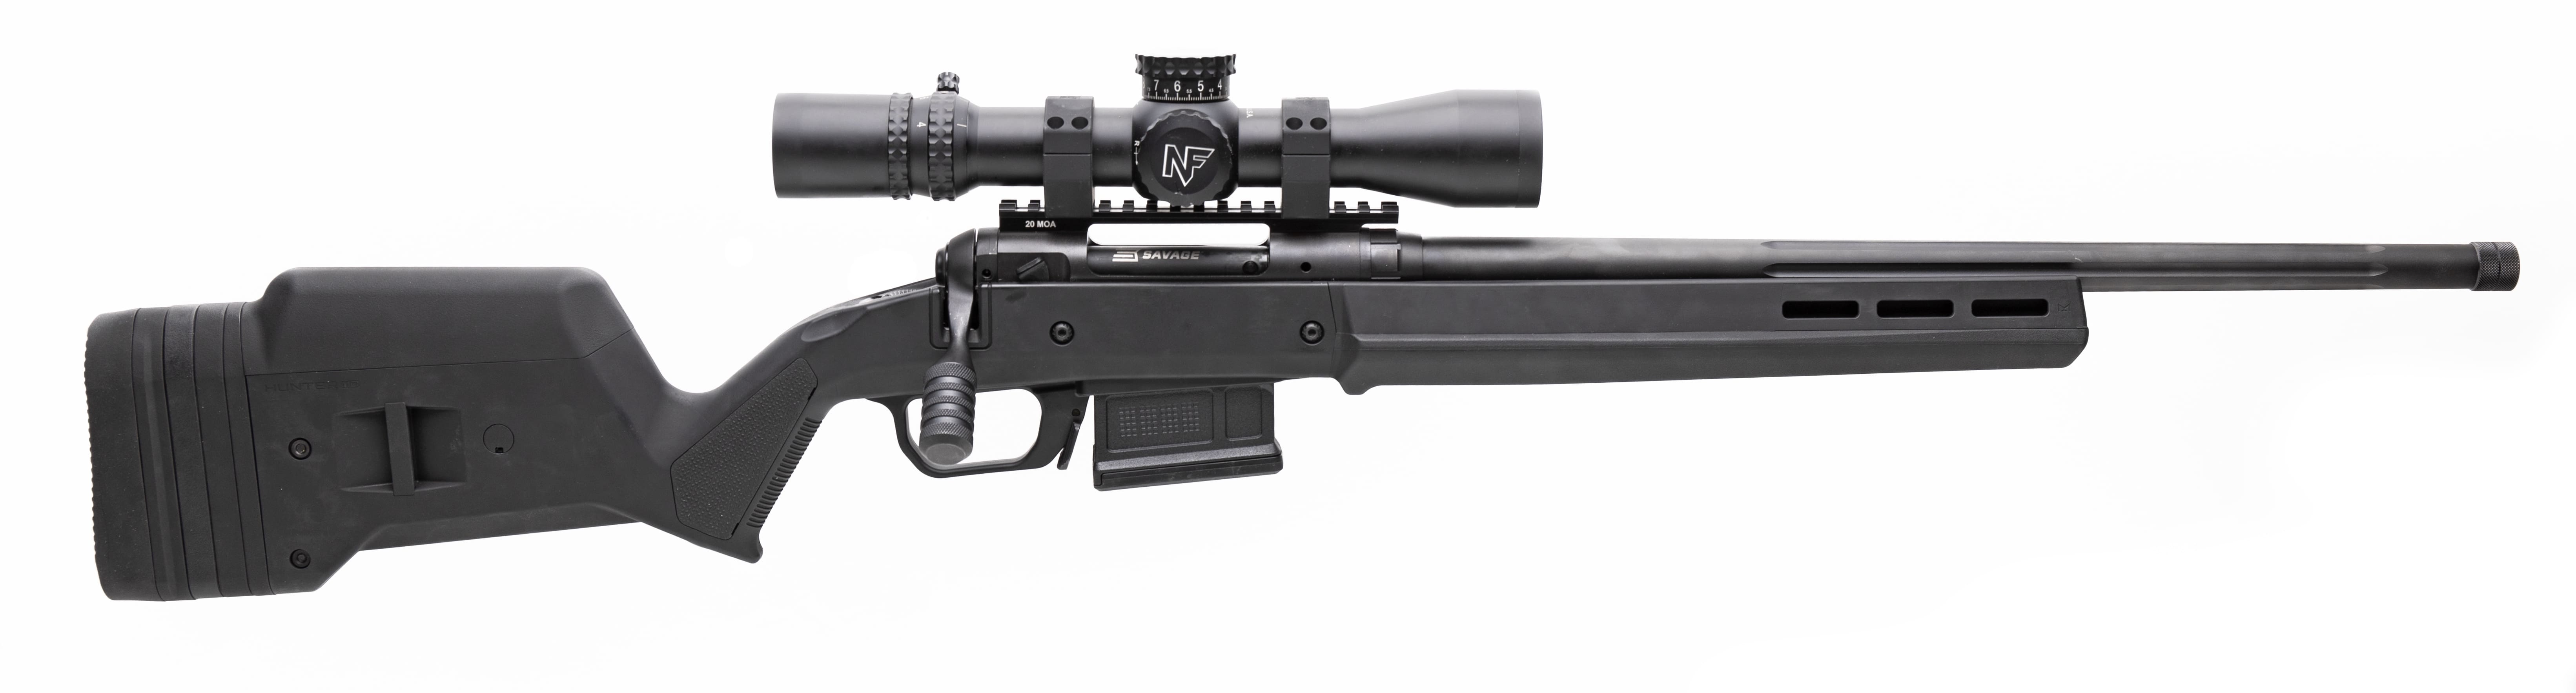 magpul-announces-hunter-110-stock-for-the-savage-110-short-action